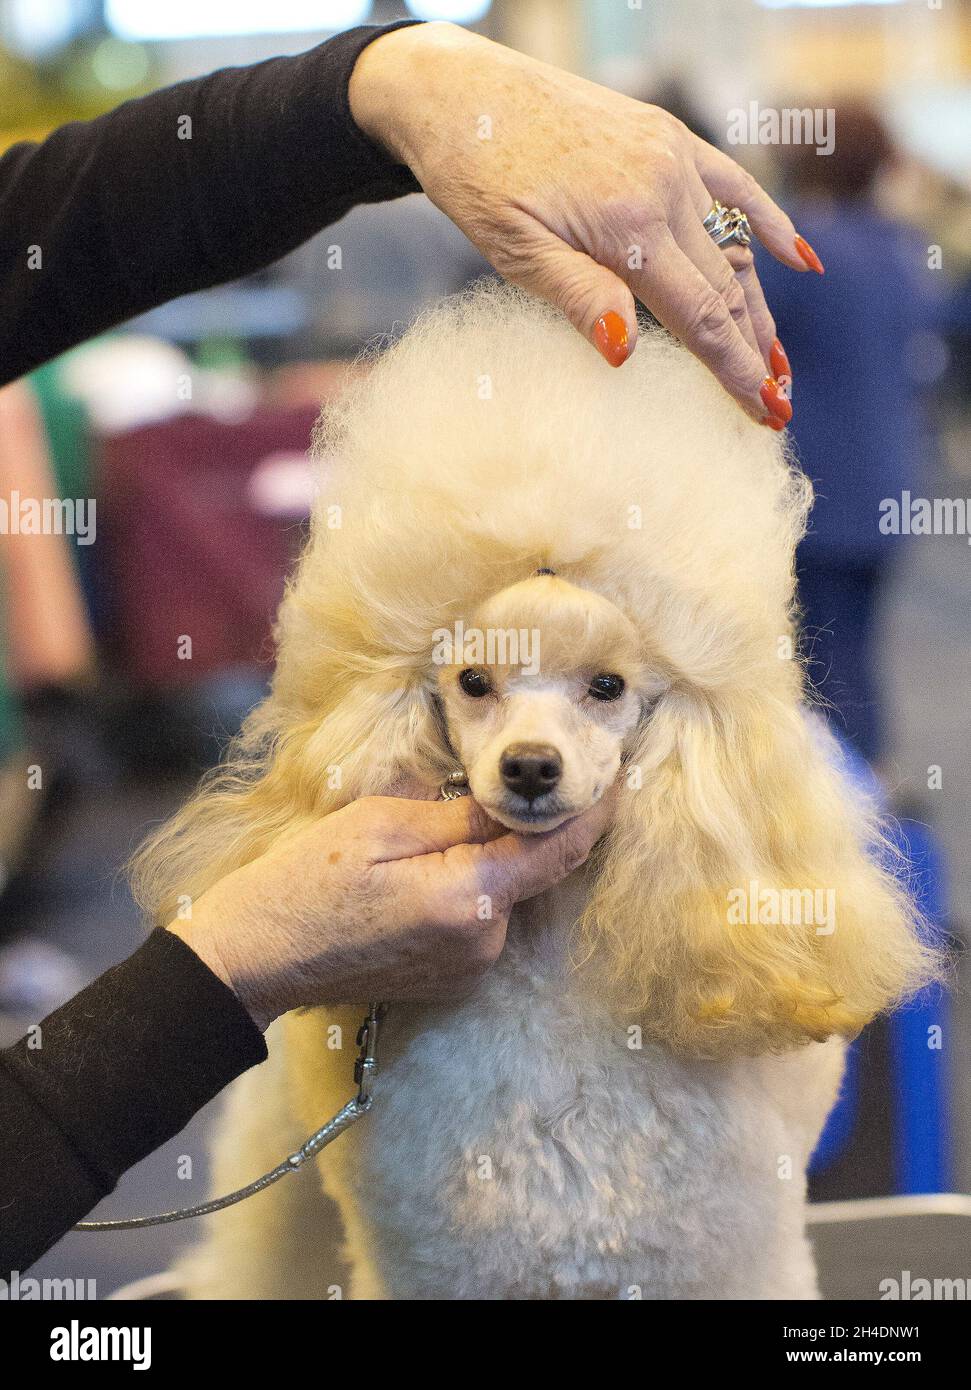 A Poodle Toy gets its hair groomed before competing during the first day of the world's largest dog show, Crufts, on Thursday March 10, 2016 at the National Exhibition Centre (NEC) in Birmingham. Stock Photo